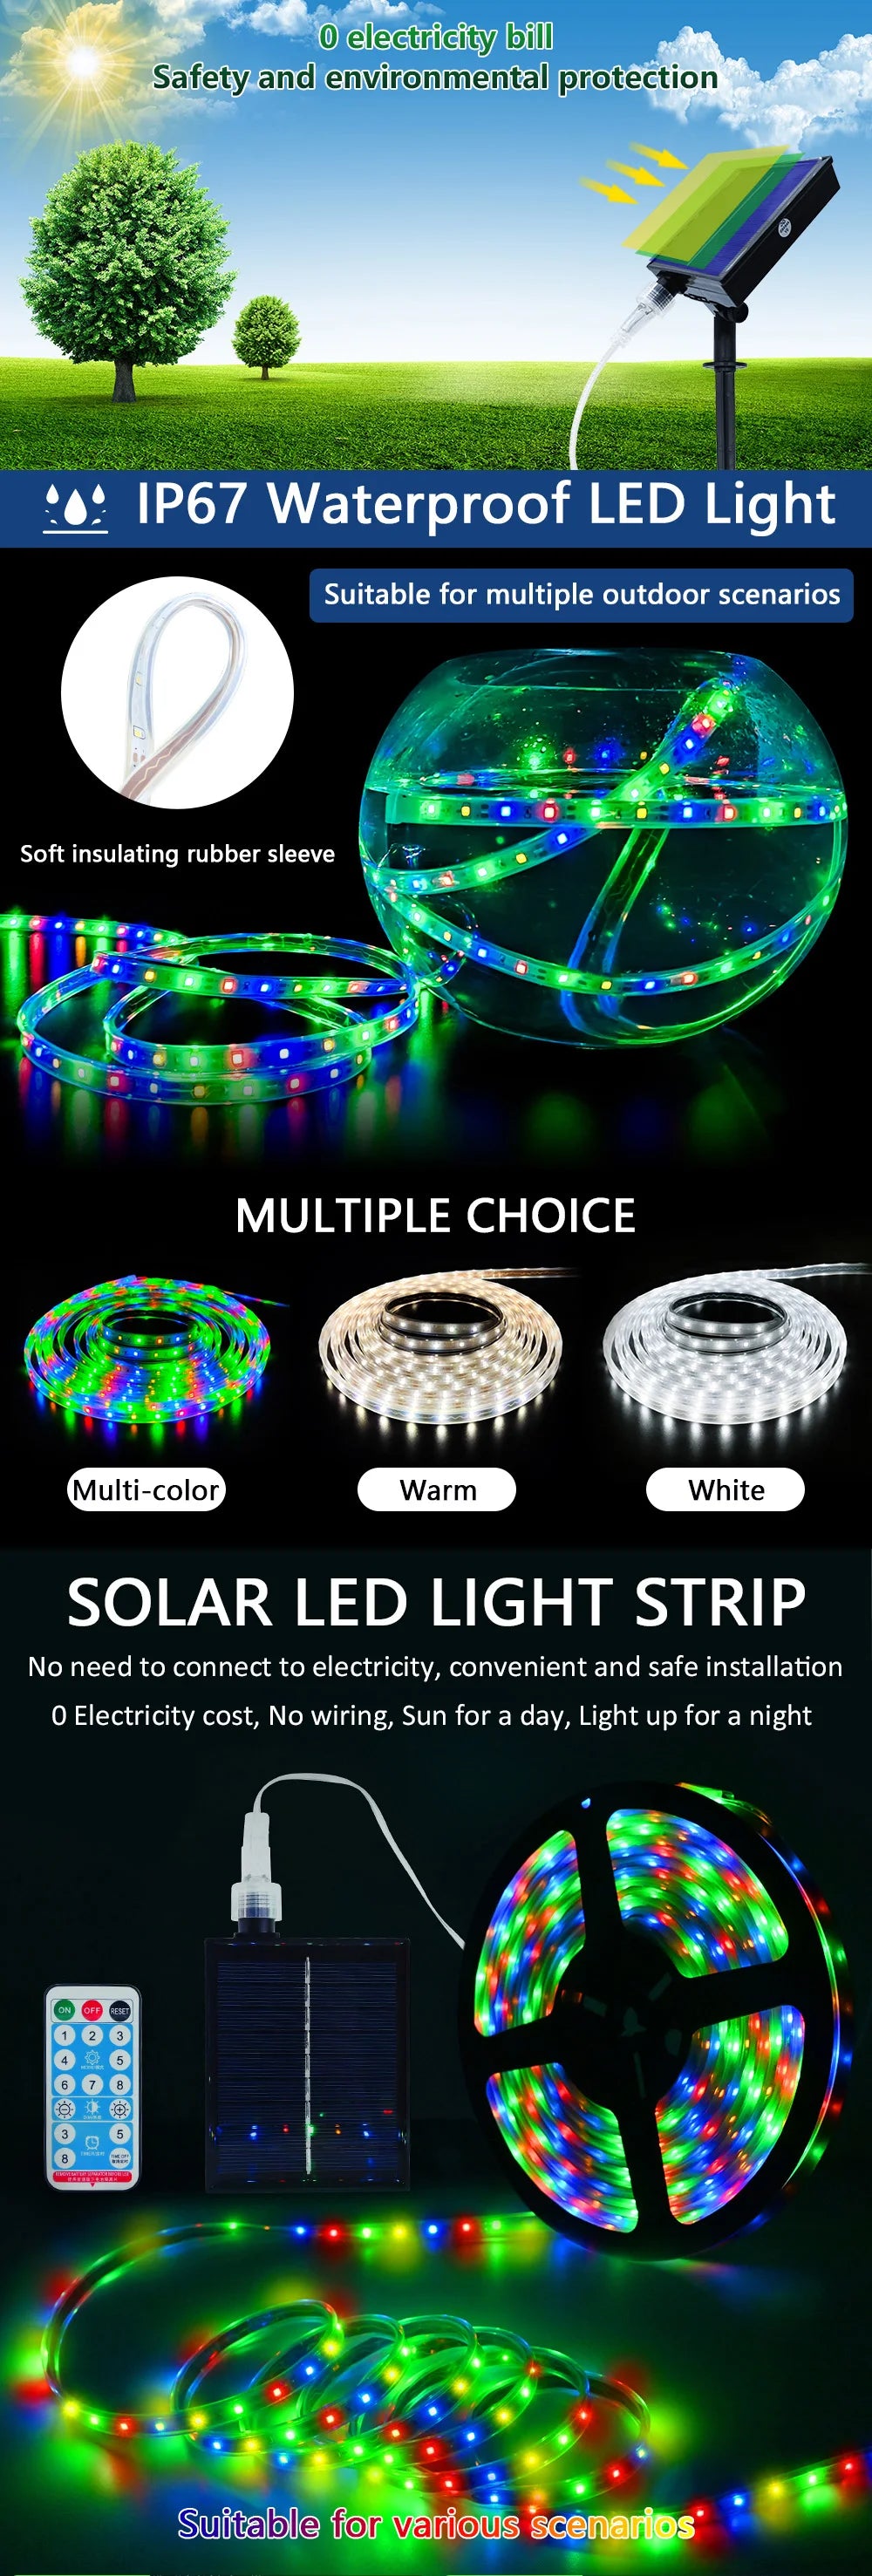 5M/10M Solar LED Strip Light, Sustainable outdoor lighting: Solar-powered LED strip with color modes, waterproof, and eco-friendly